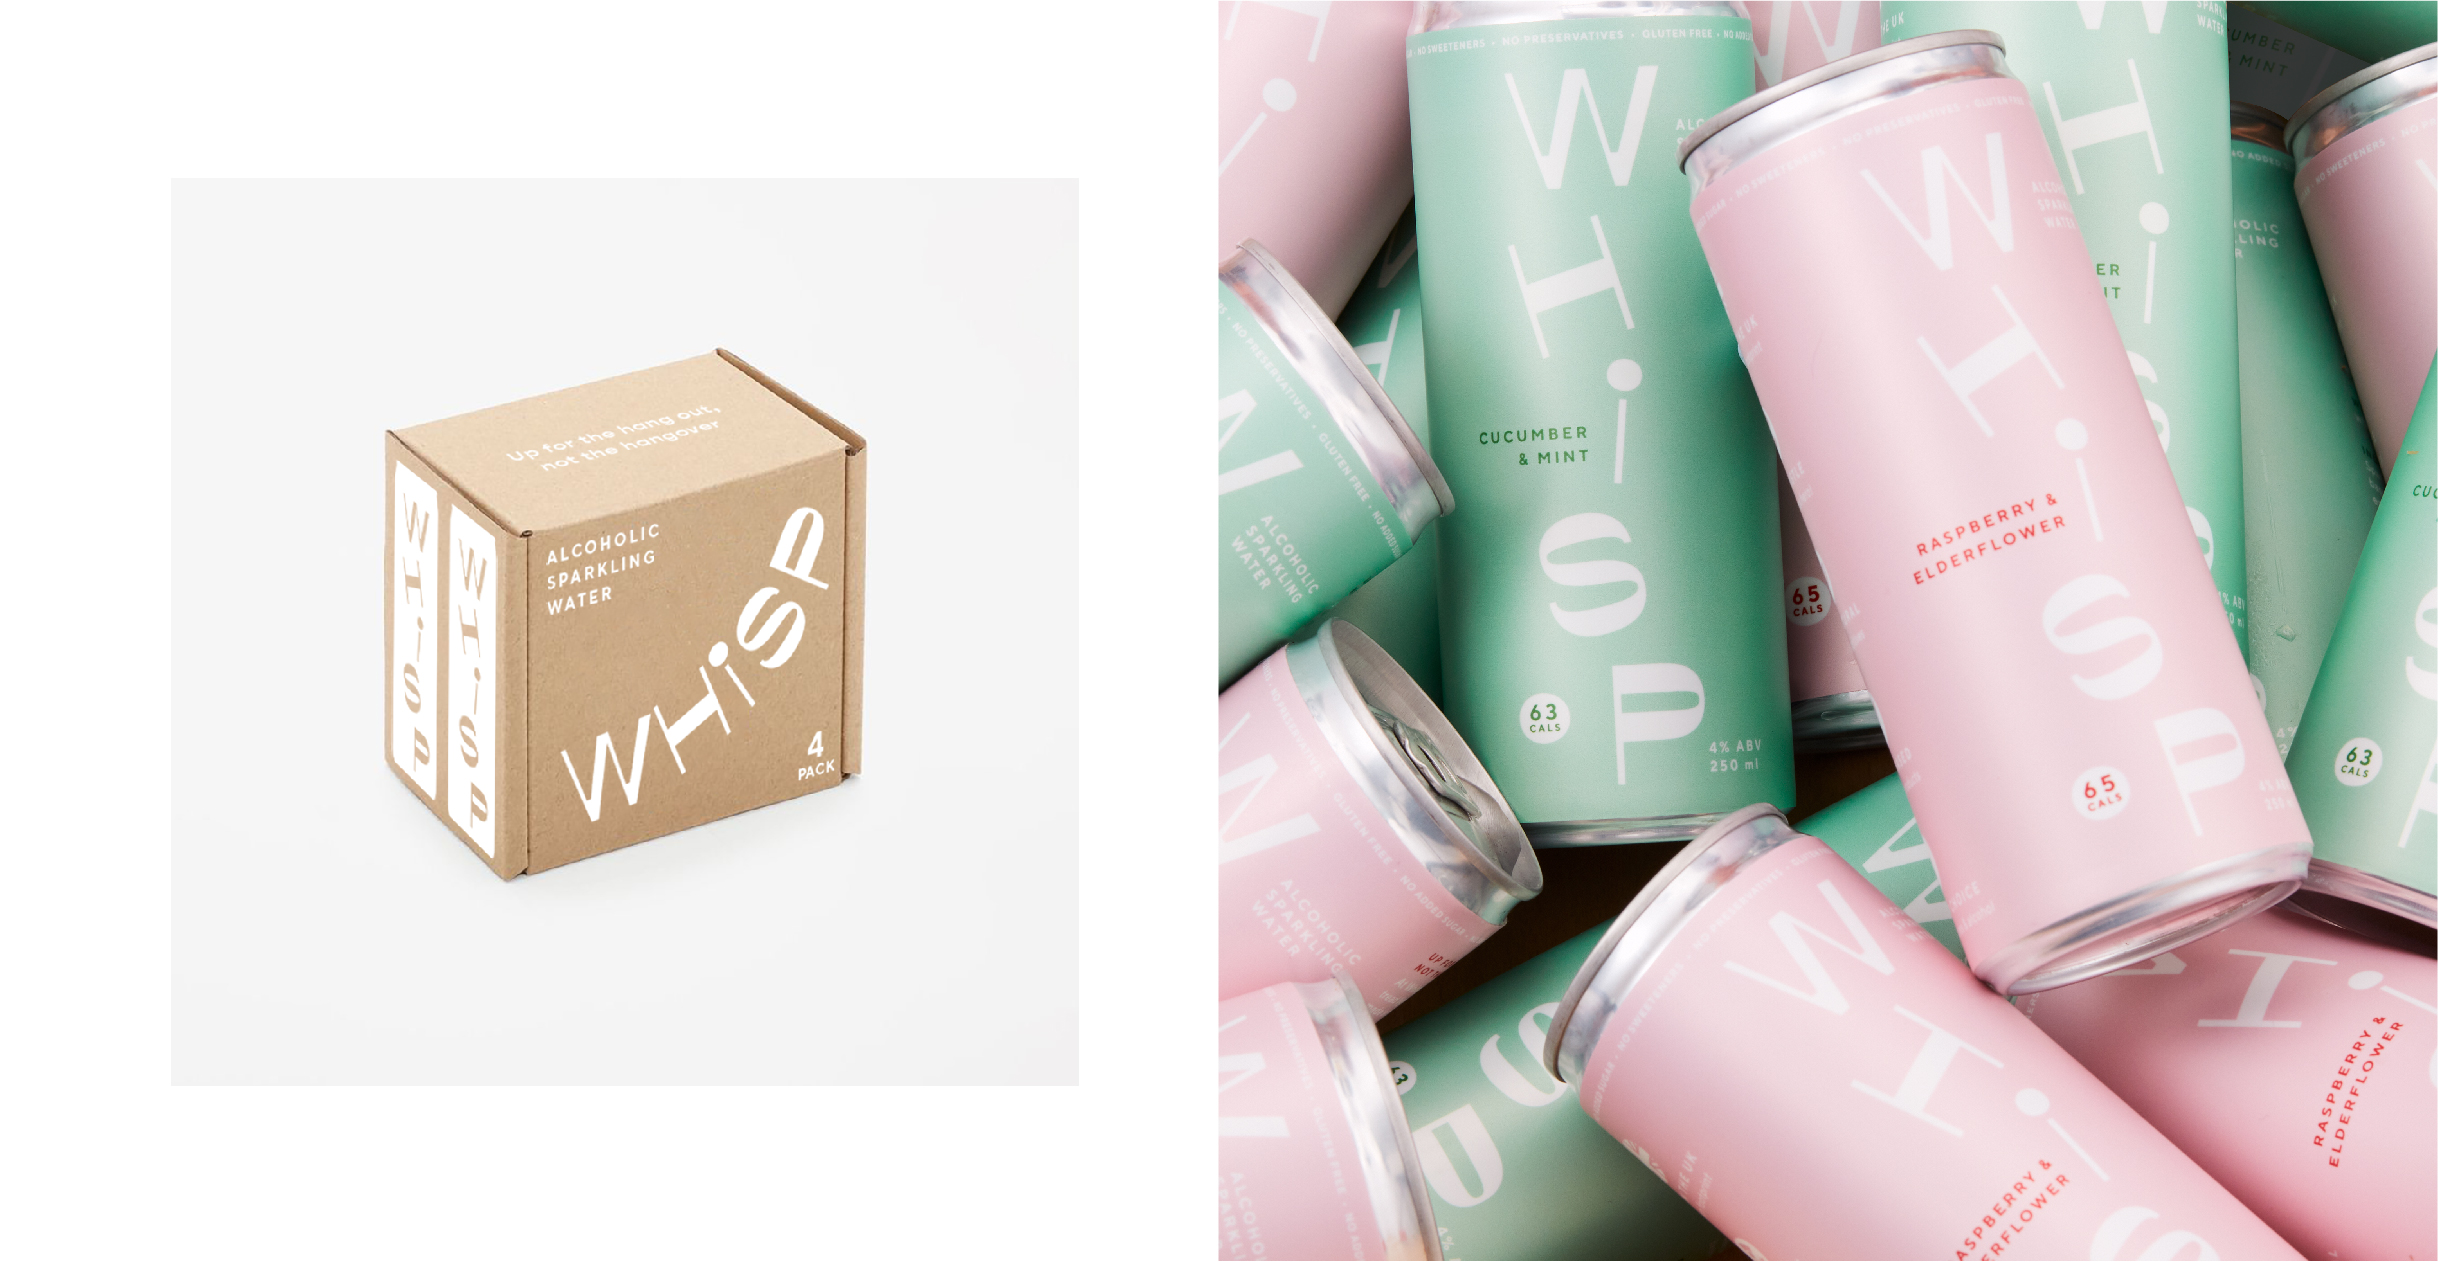 Whisp packaging - box and cans